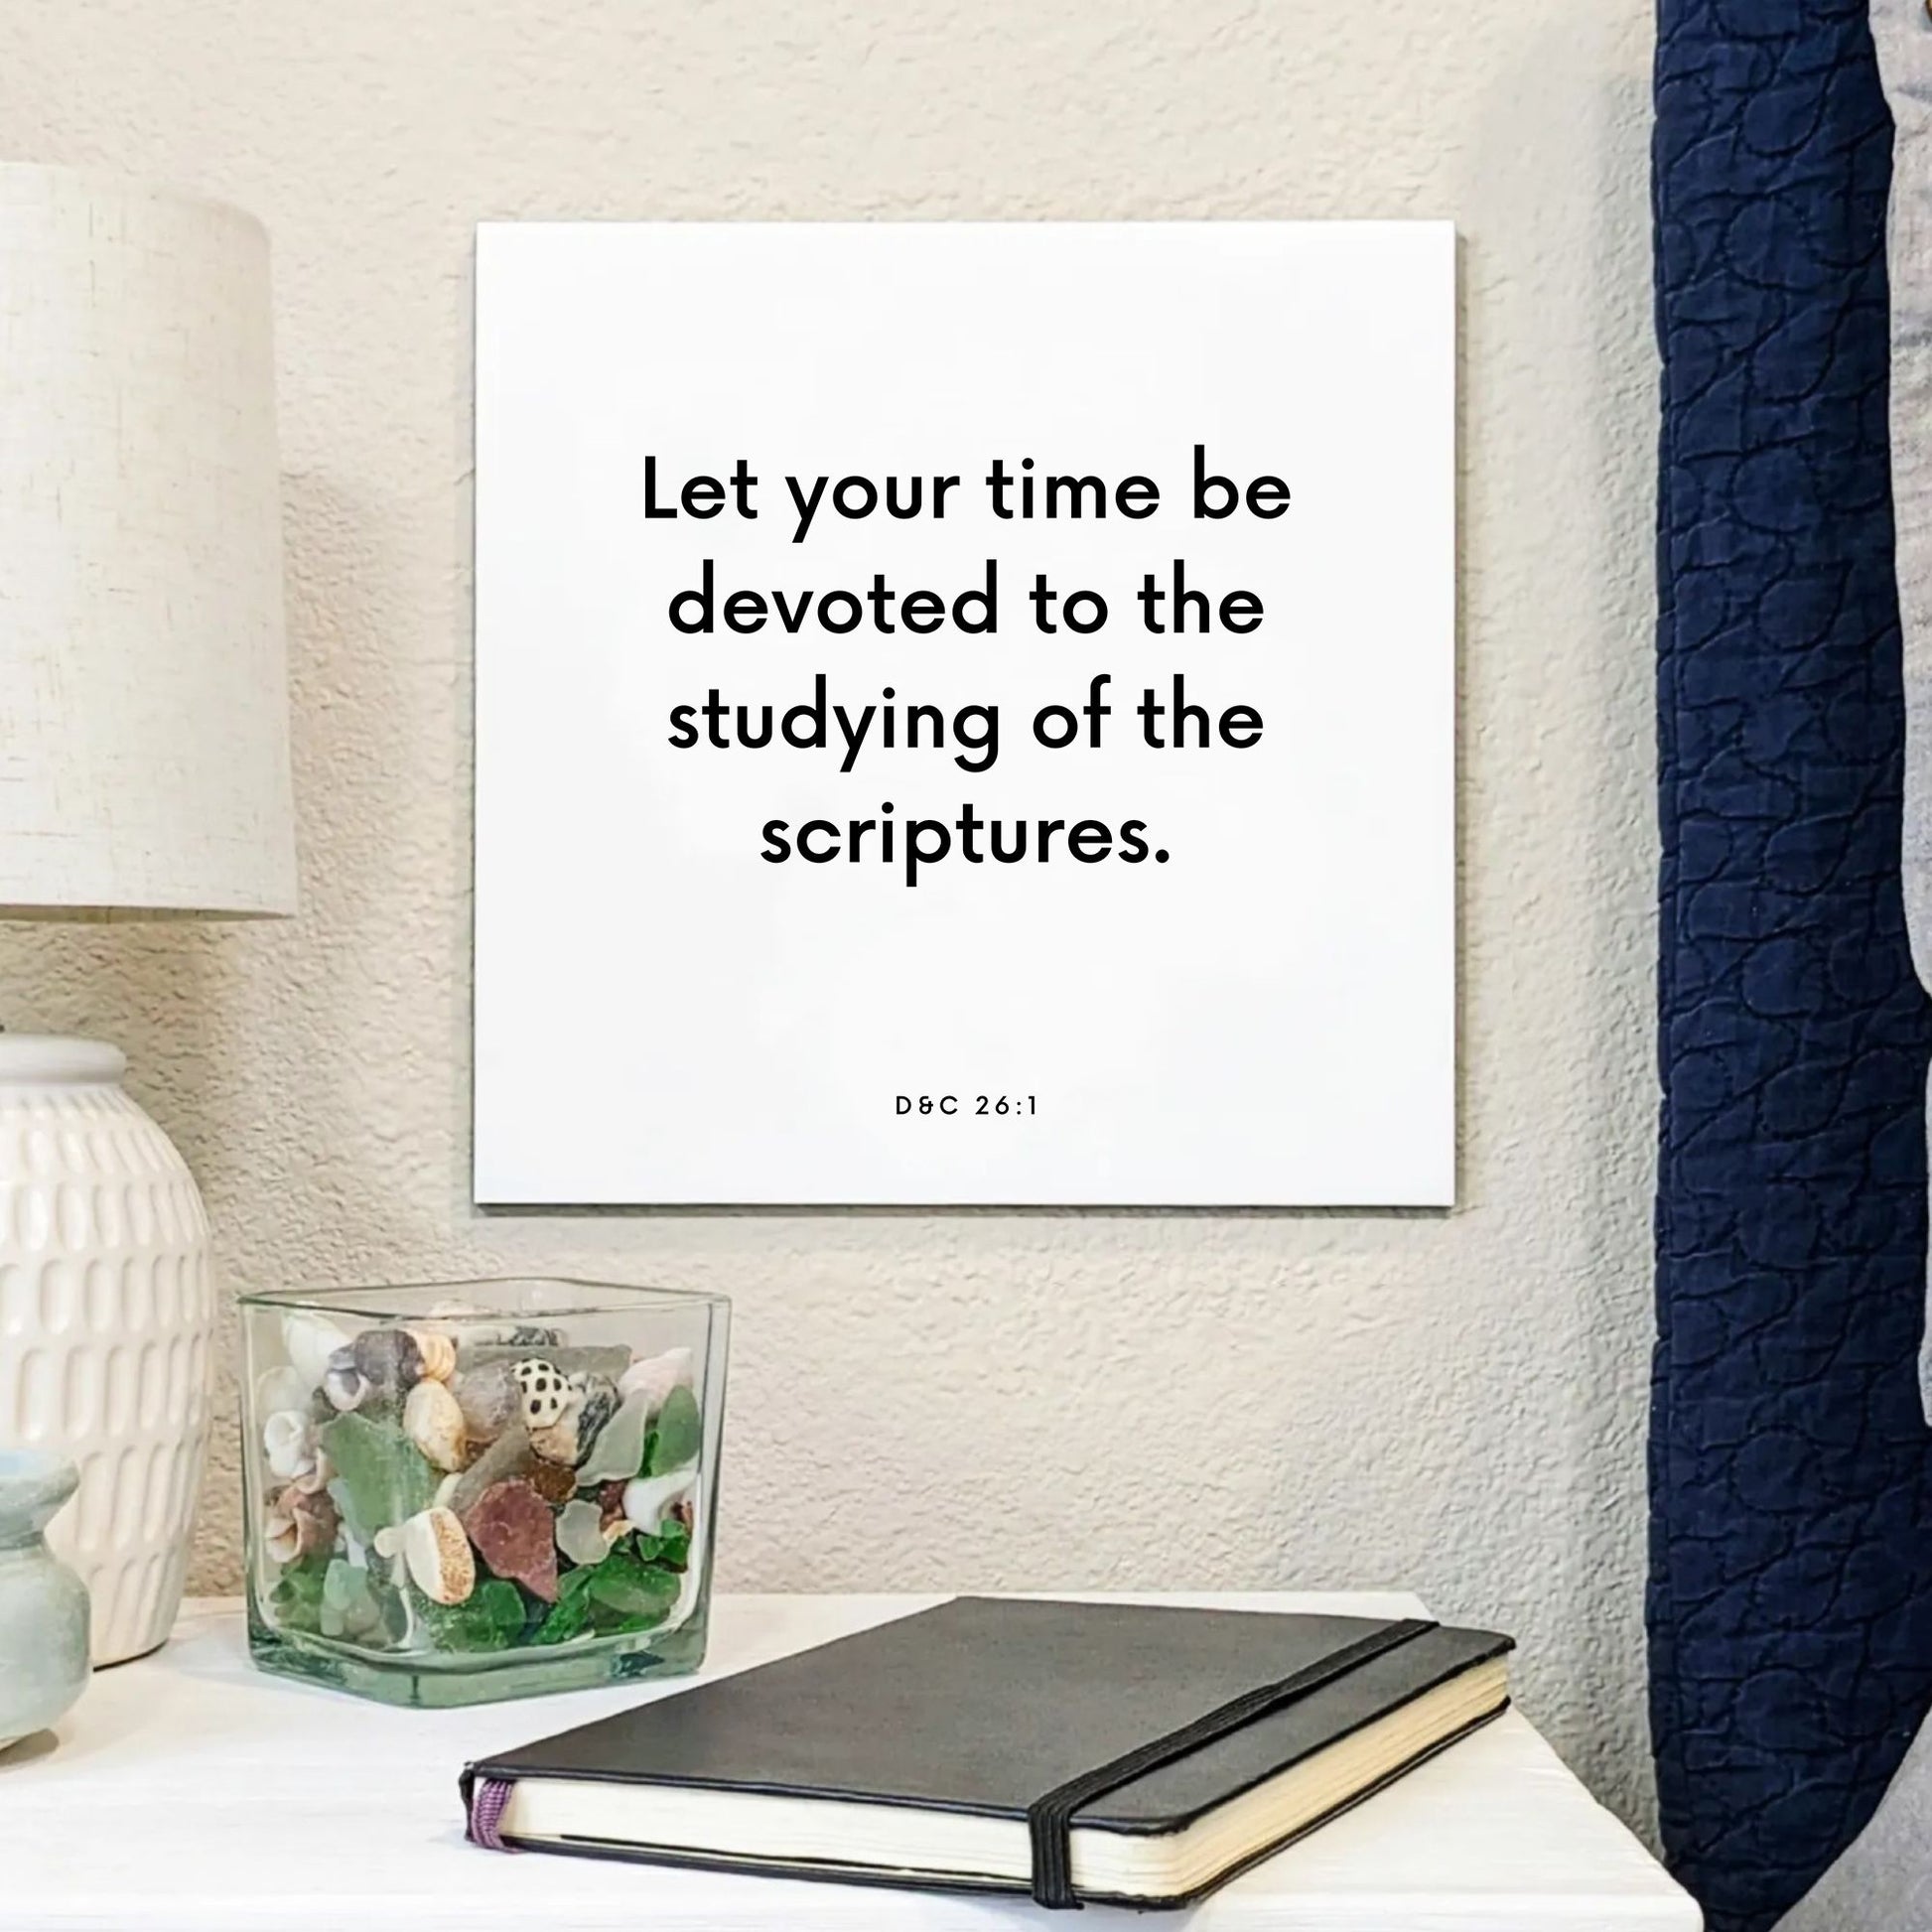 Bedside mouting of the scripture tile for D&C 26:1 - "Let your time be devoted to the studying of the scriptures"